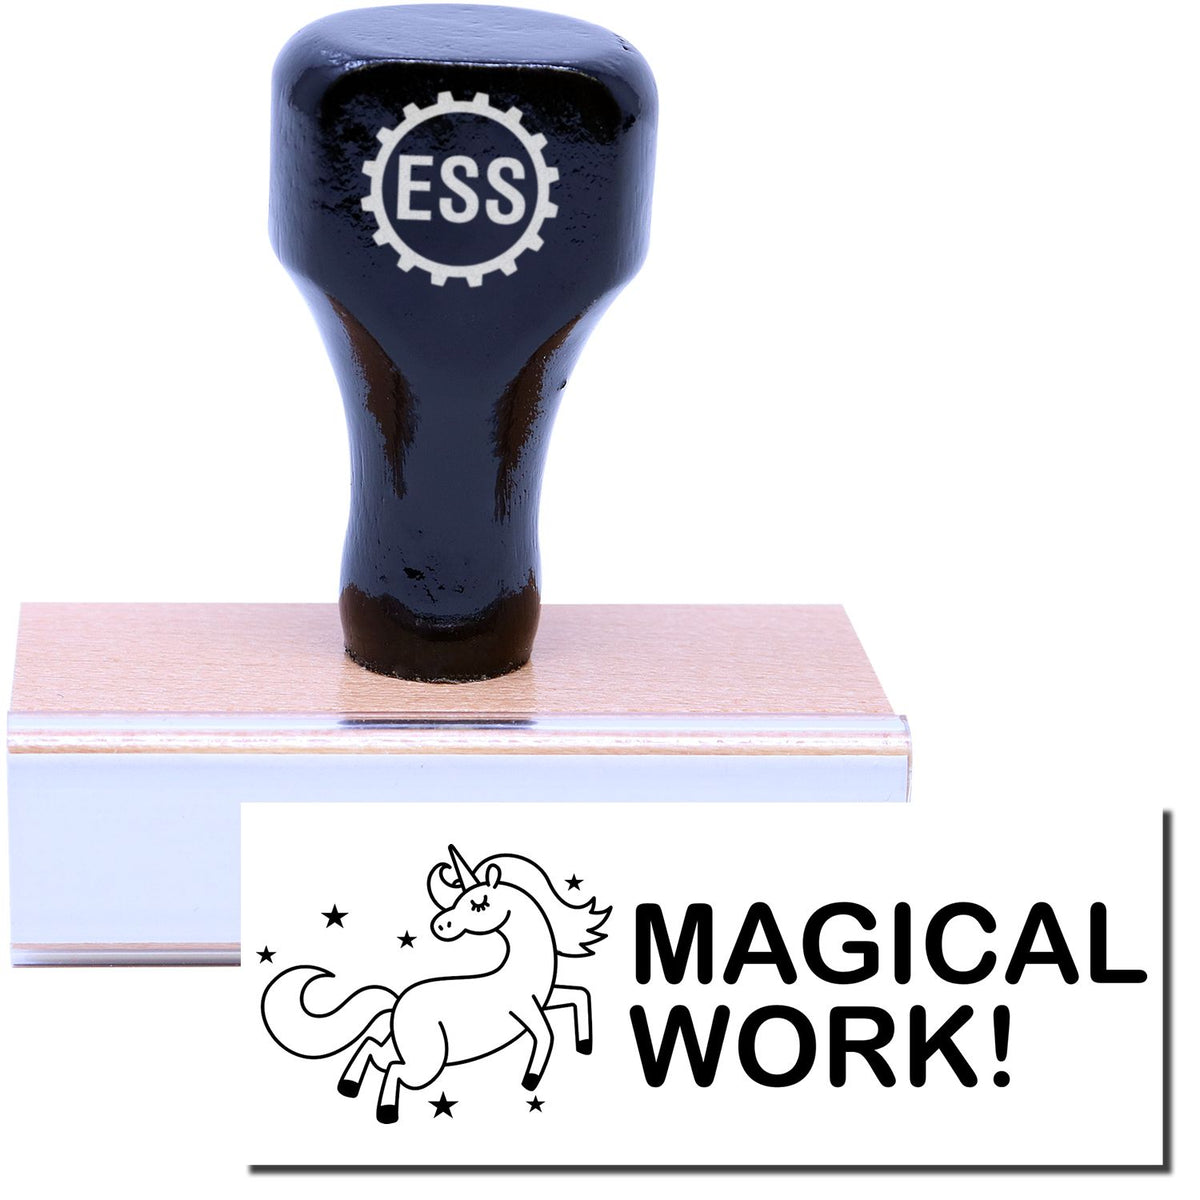 A stock office rubber stamp with a stamped image showing how the text &quot;MAGICAL WORK!&quot; in a large font with the image of a unicorn dancing among the stars is displayed after stamping.